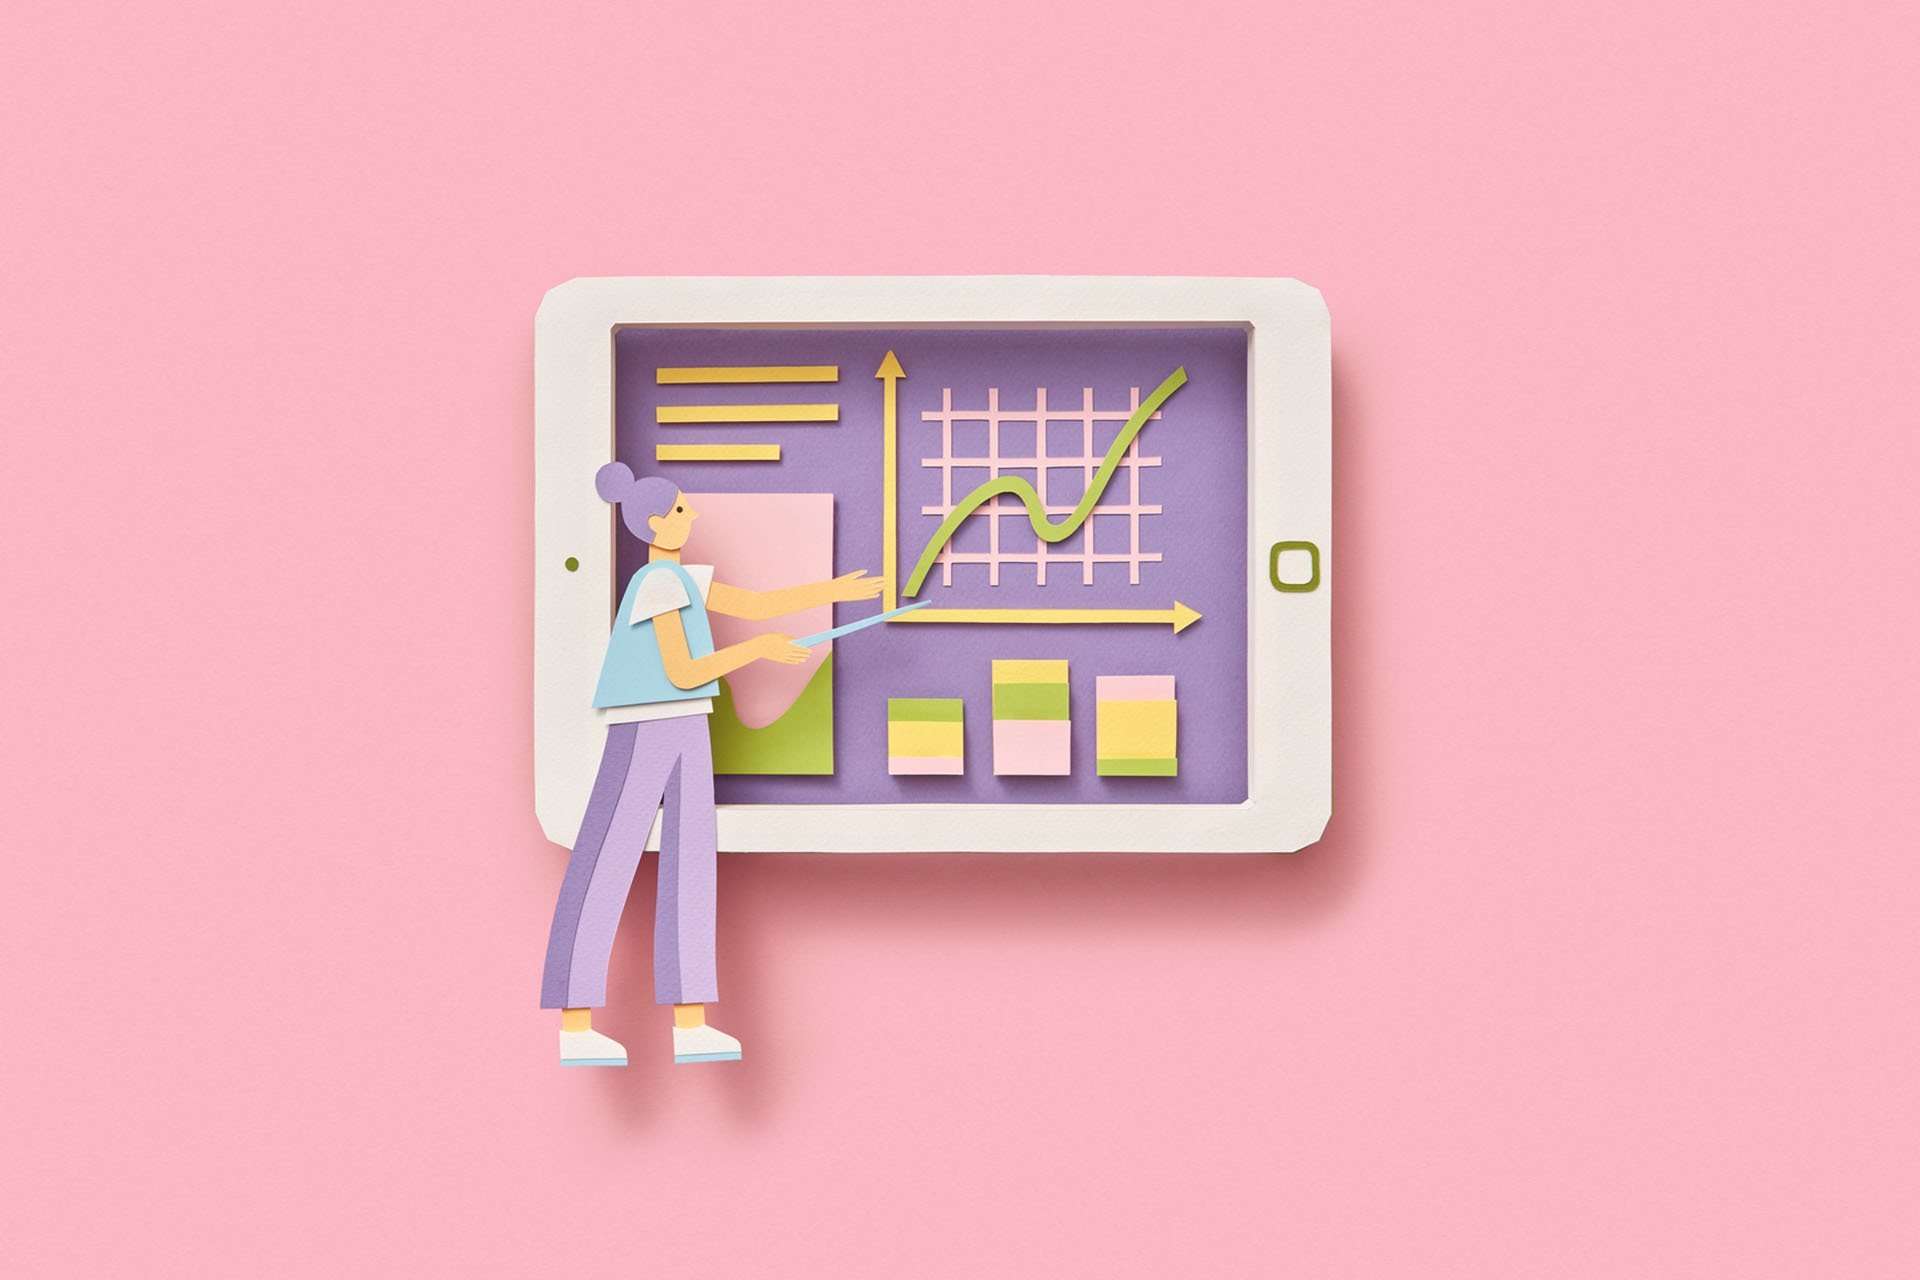 Paper cut out of a girl analysing data on an ipad